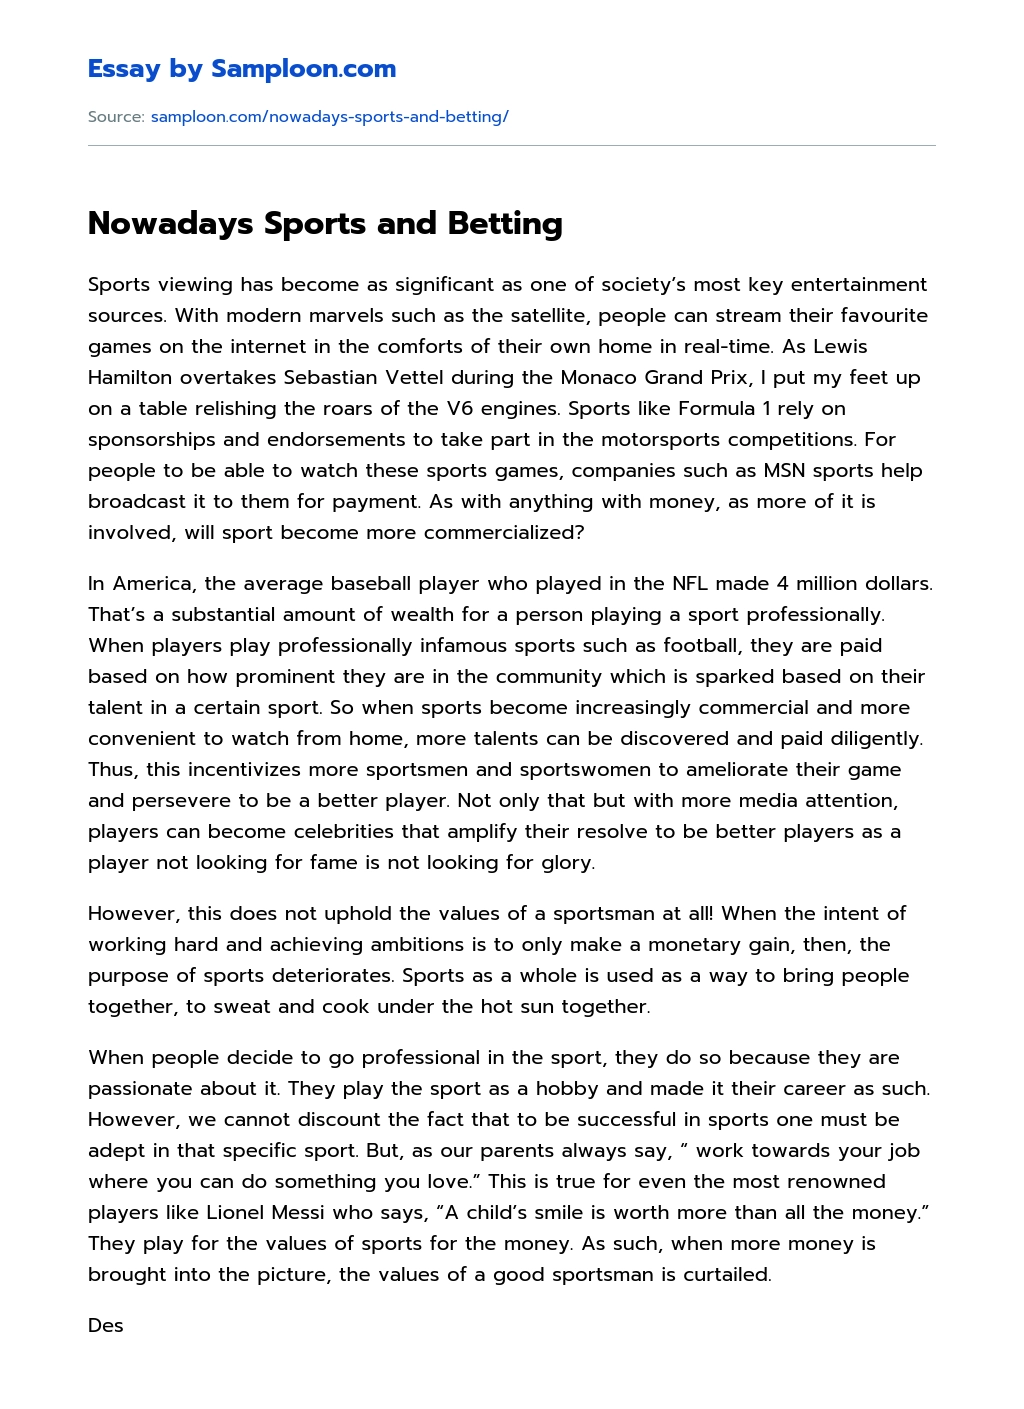 Nowadays Sports and Betting essay